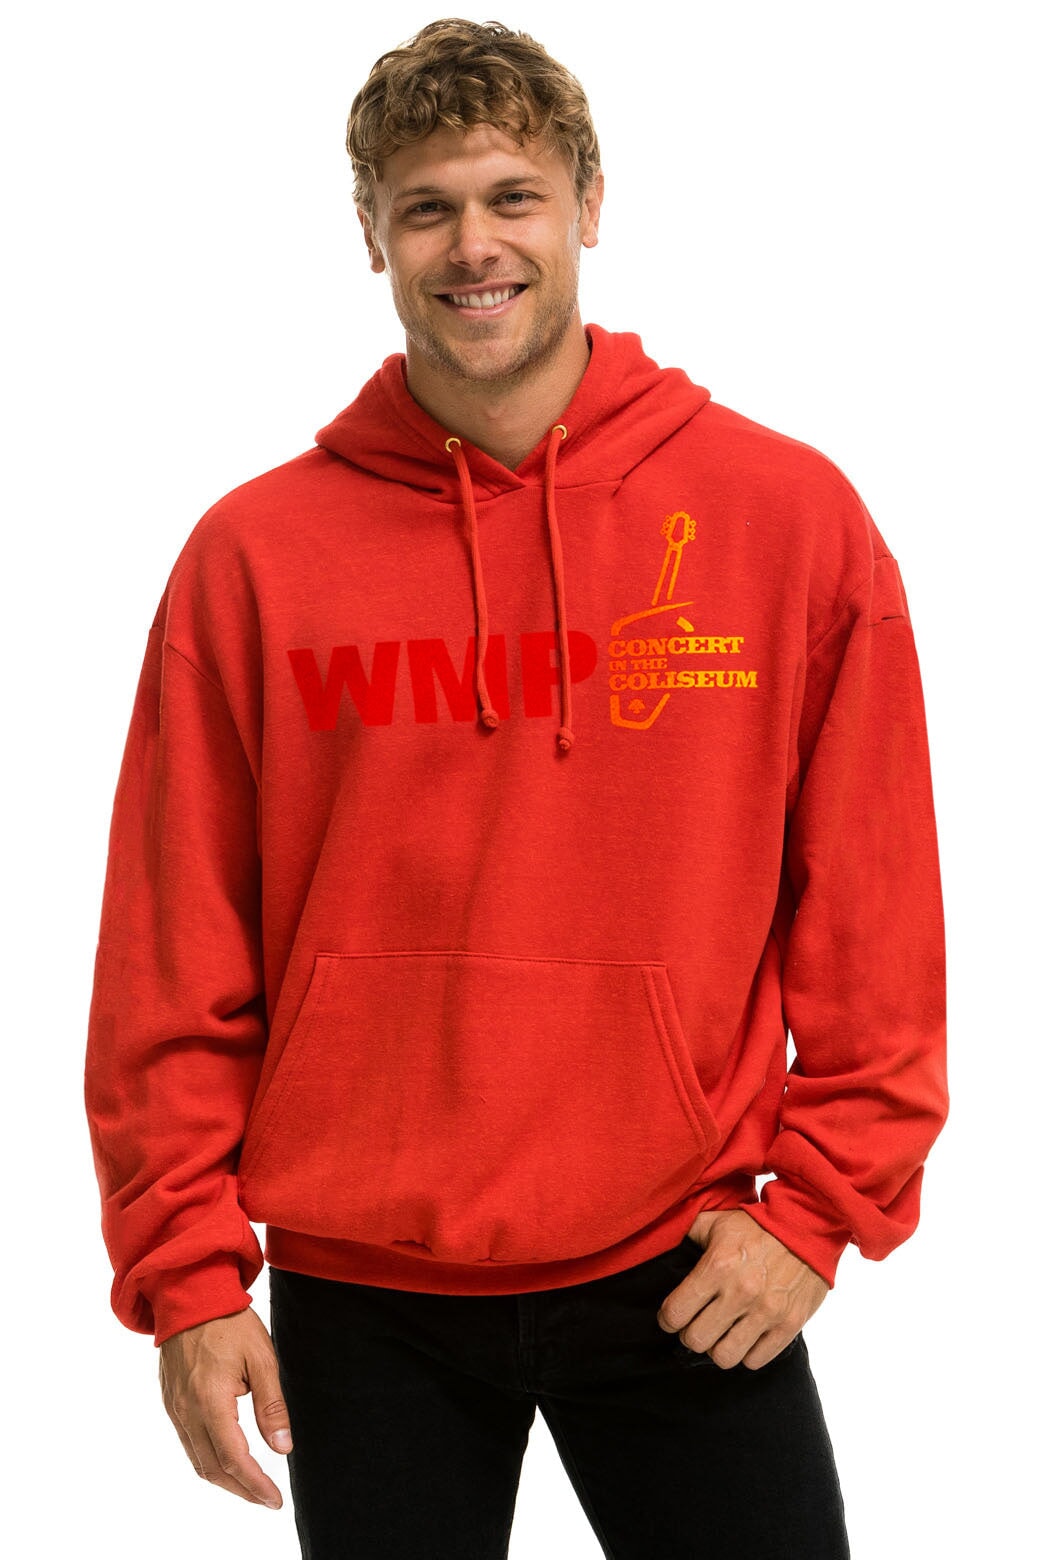 WMPXO 2024 COLISEUM CONCERT RELAXED PULLOVER HOODIE - RED Hoodie Aviator Nation 